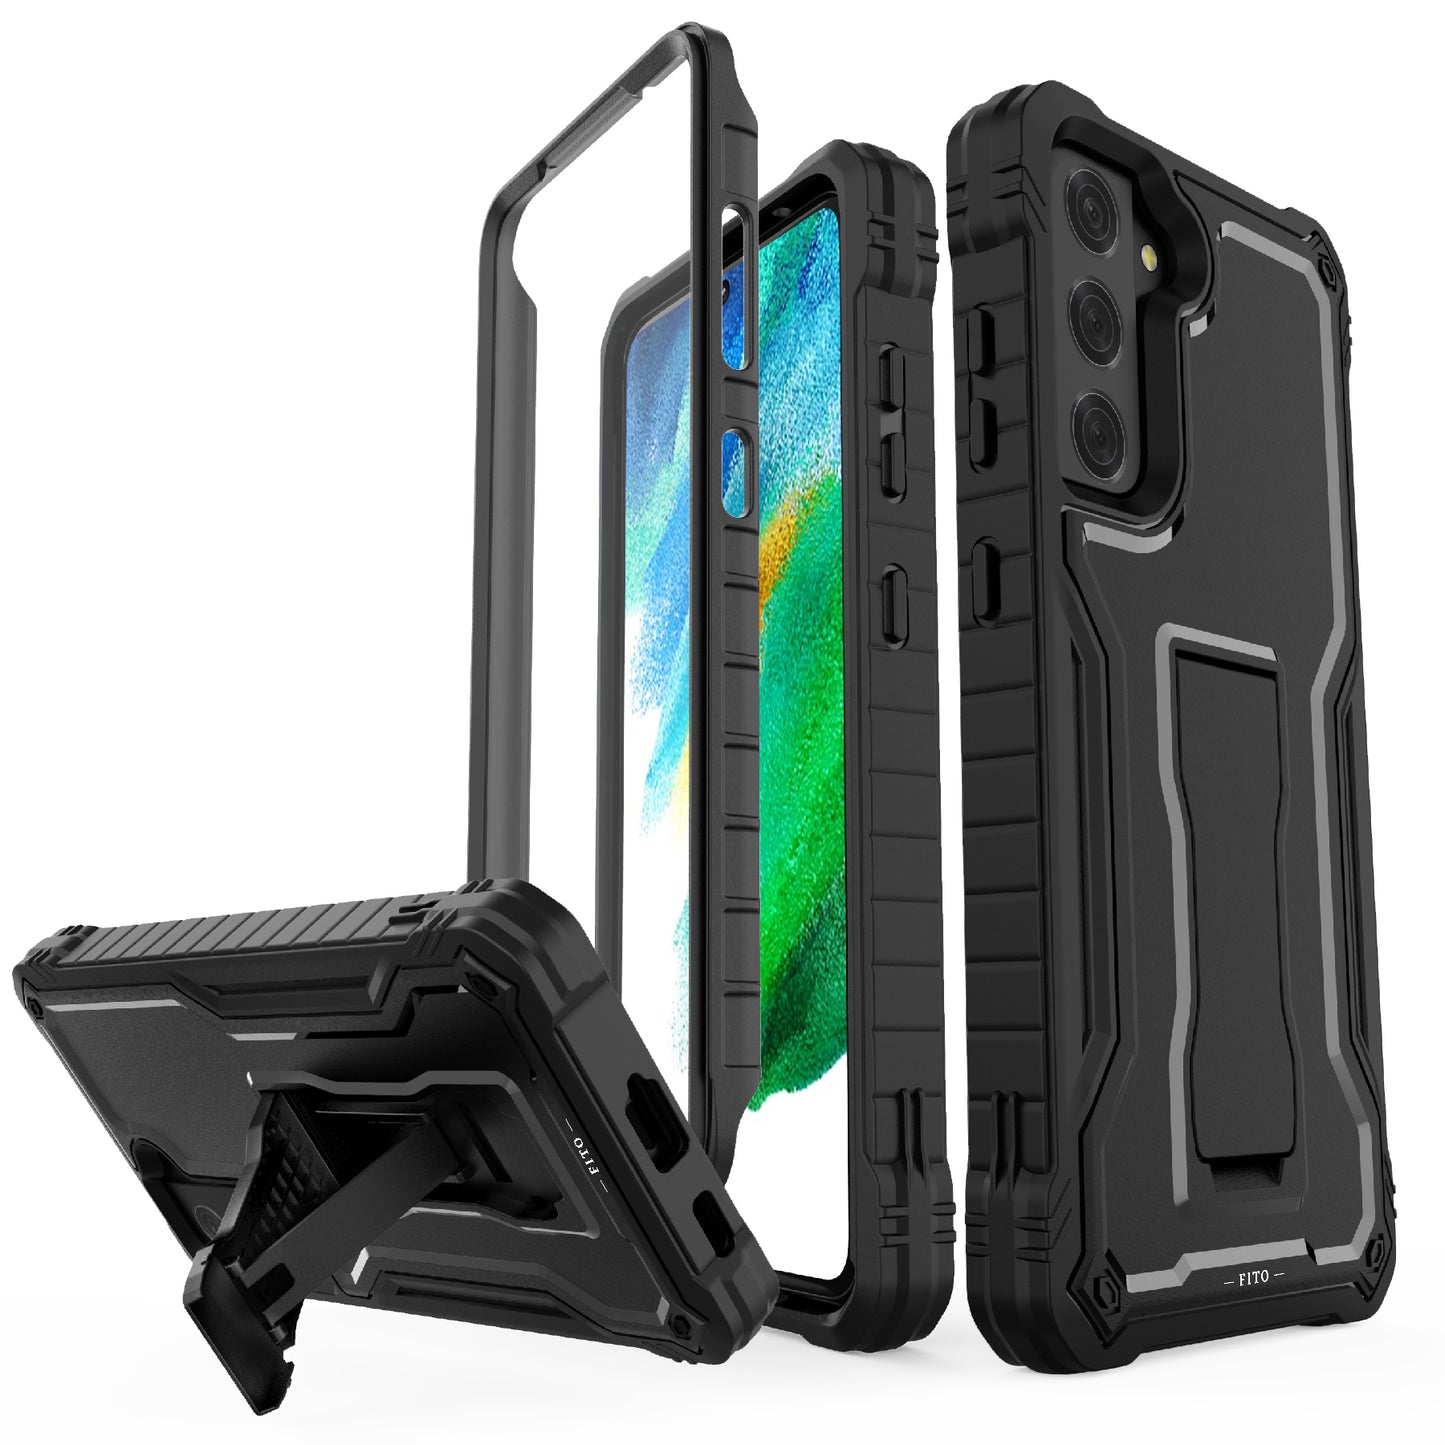 FITO for Samsung Galaxy S21 FE Case, Dual Layer Shockproof Heavy Duty Case for Samsung S21 FE 5G Phone with Screen Protector, Built-in Kickstand